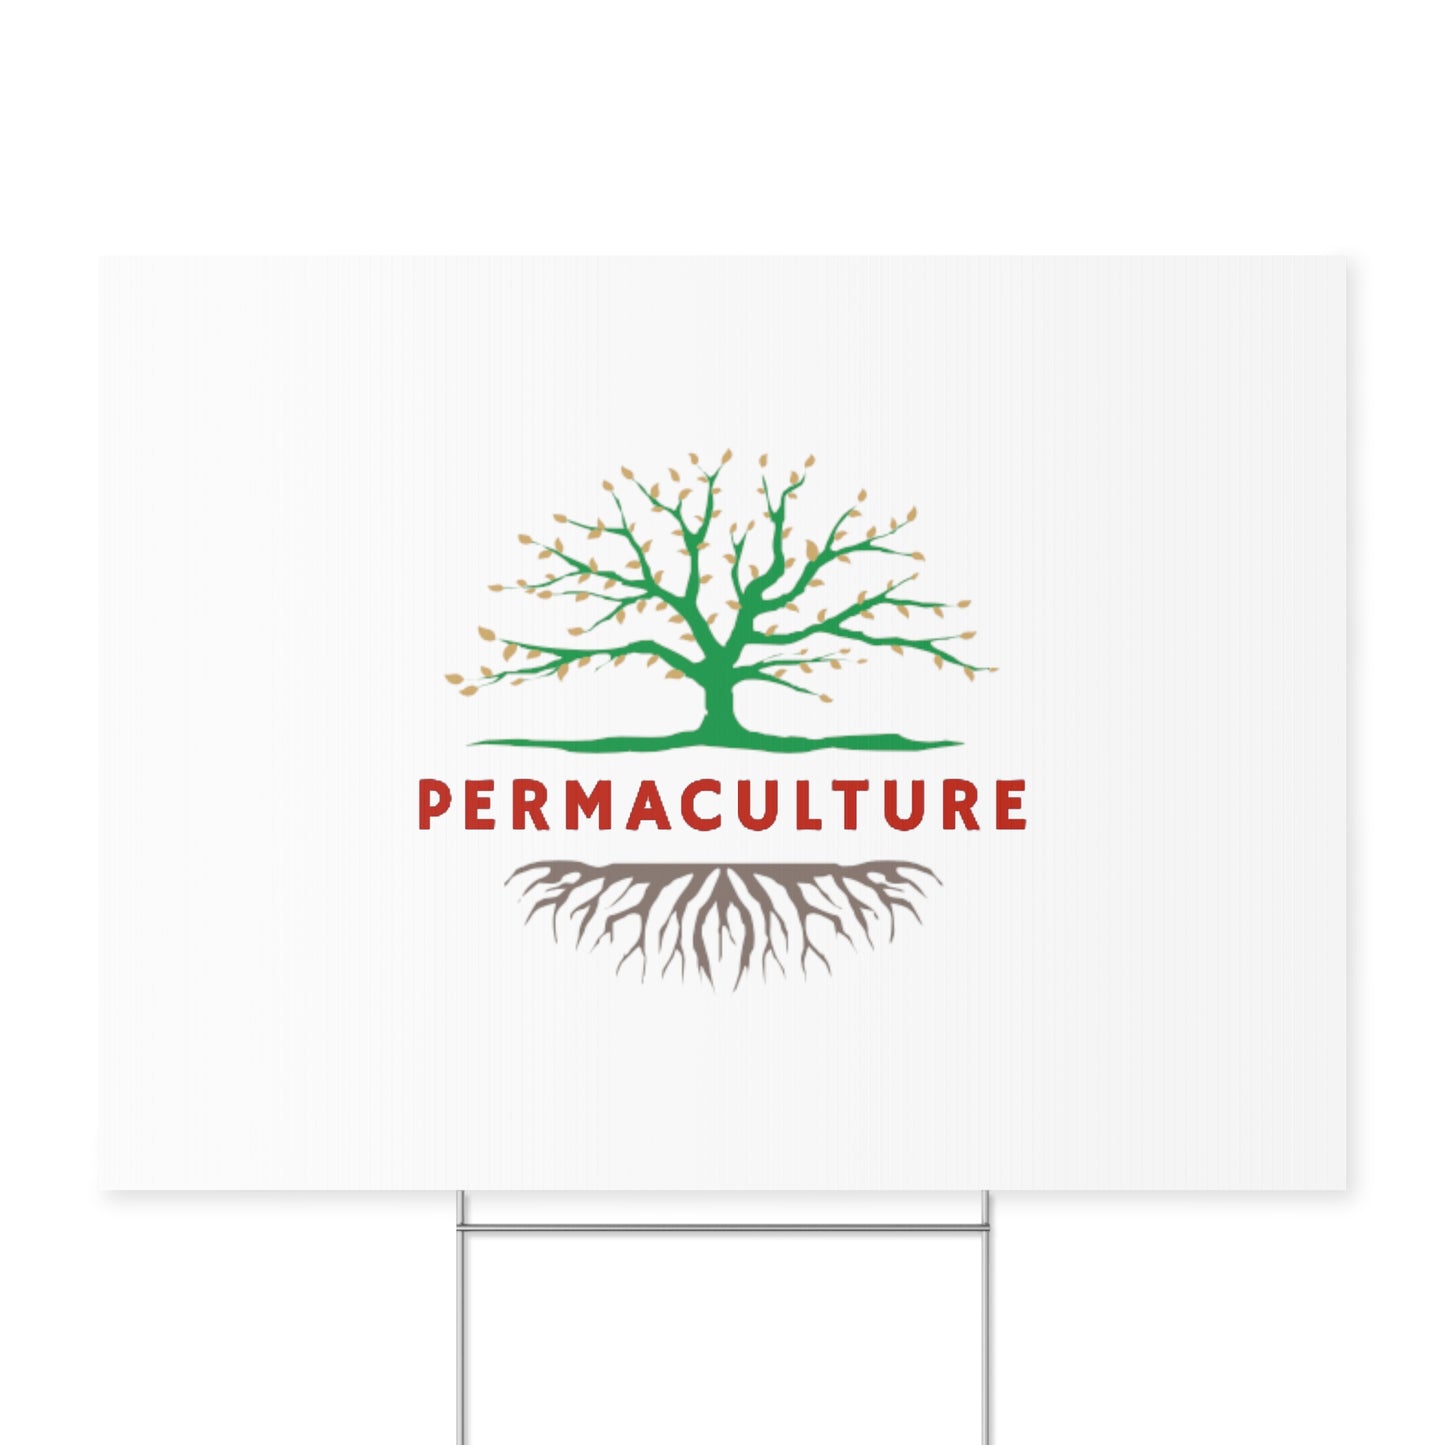 PERMACULTURE Yard Sign